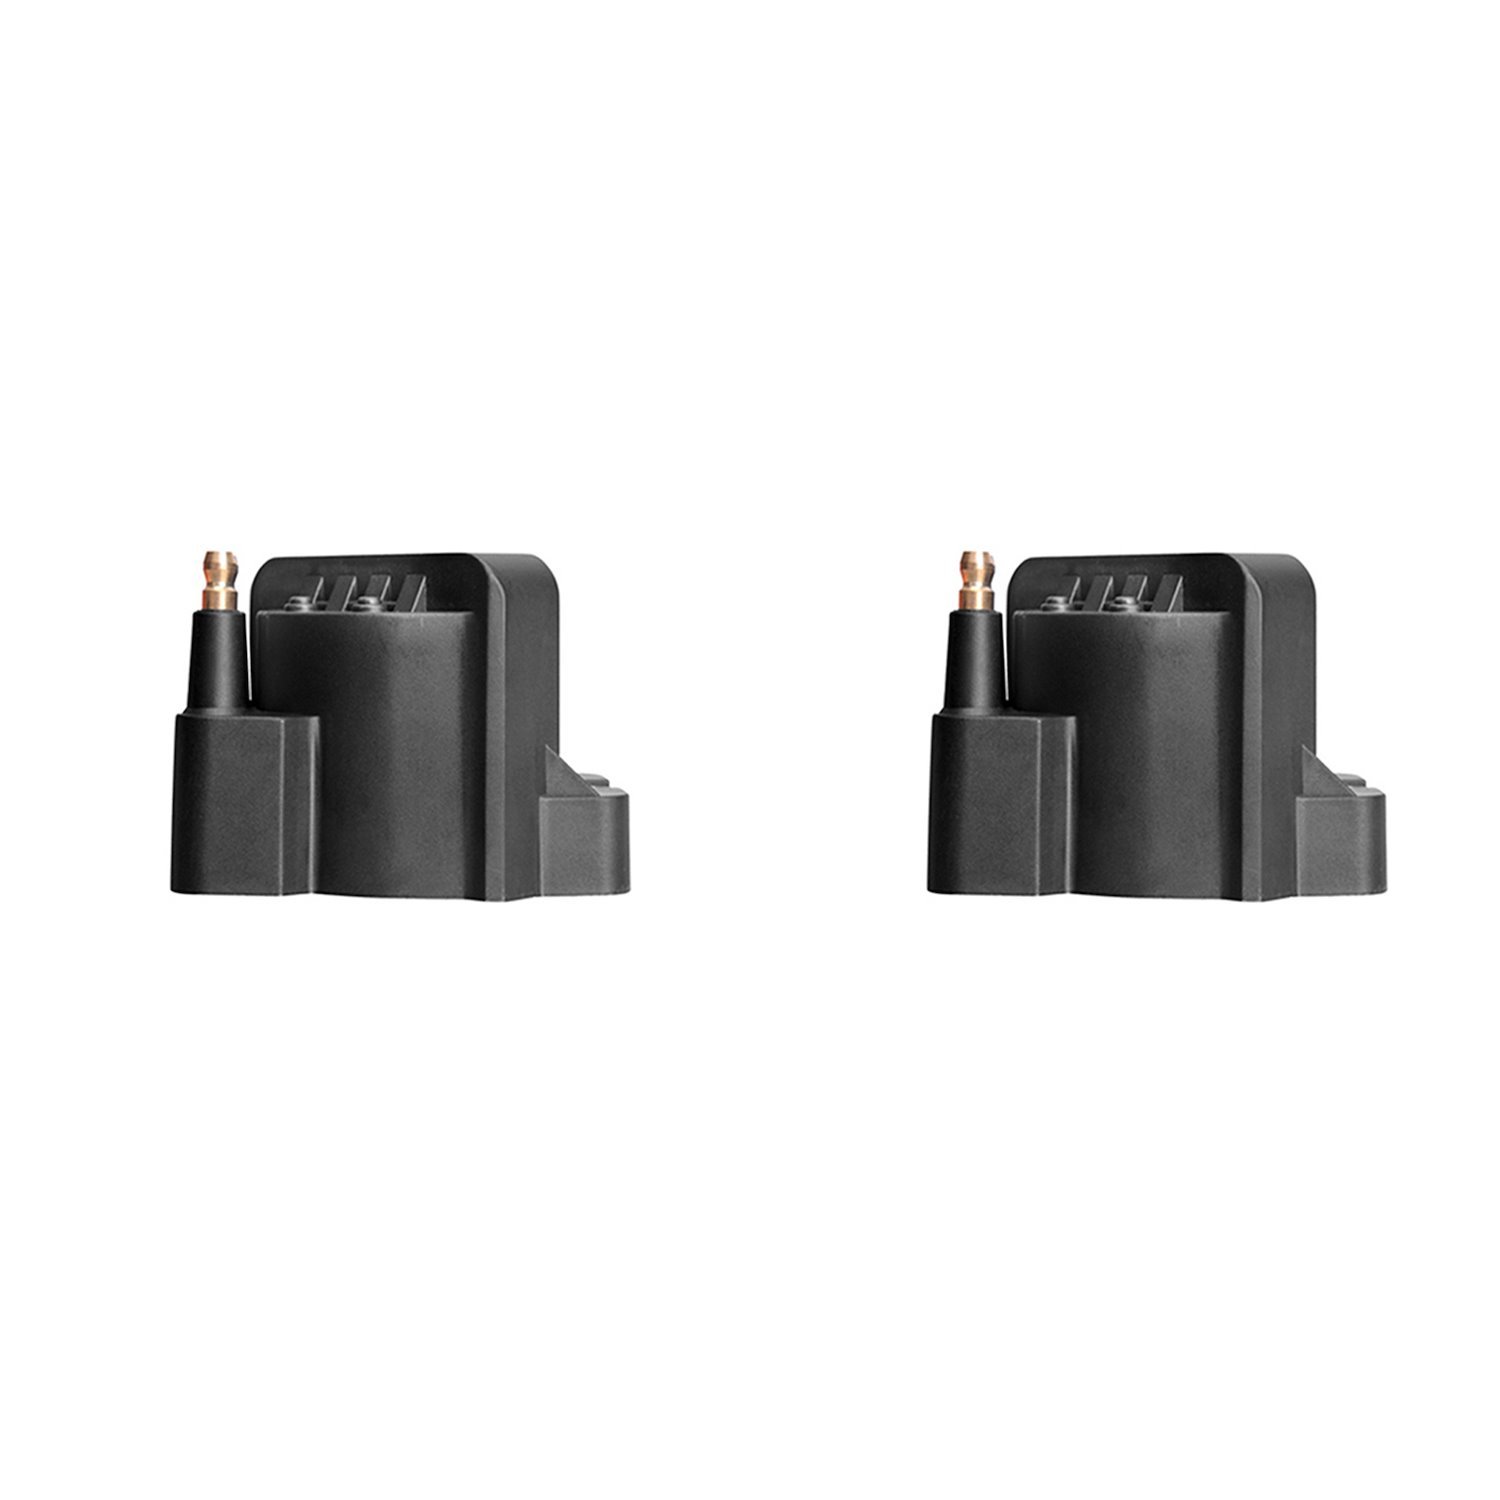 OE Replacement Ignition Coils for GM